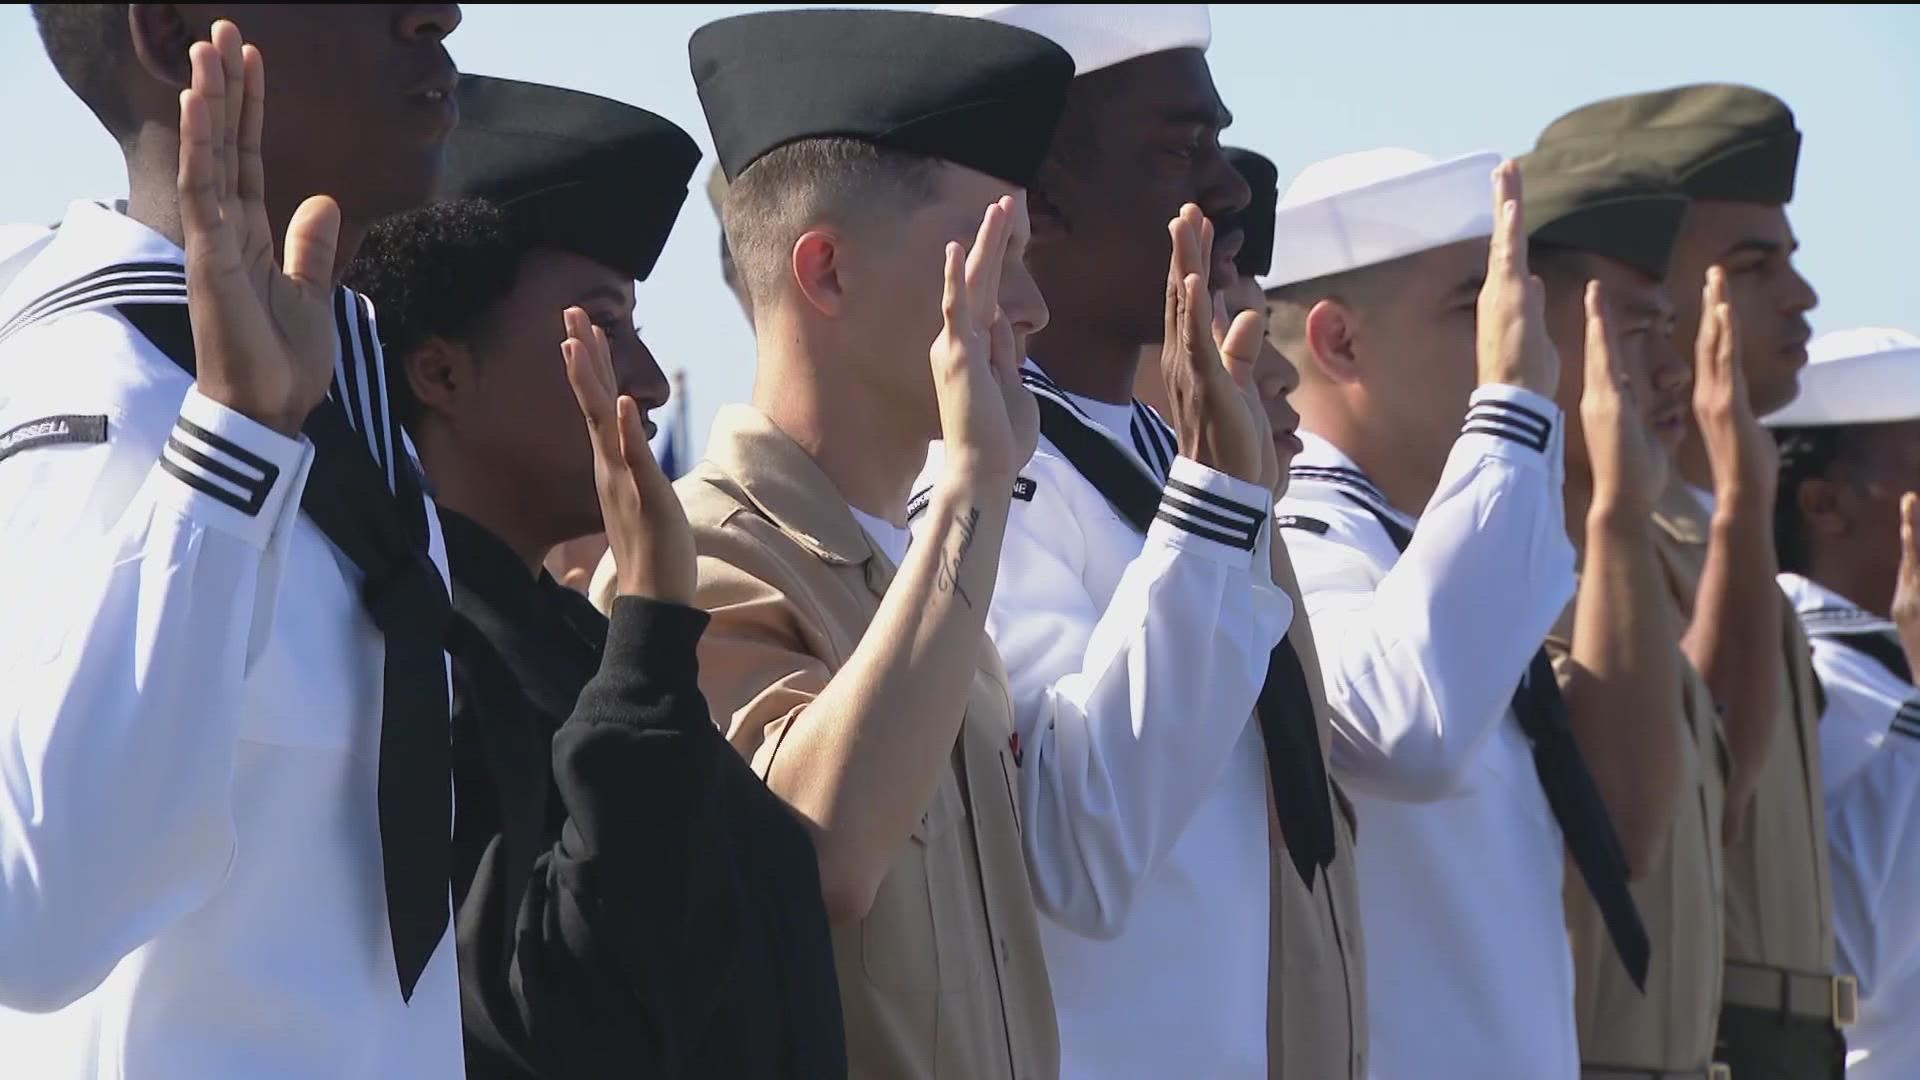 The 20 service members represent the U.S. Navy, Marines and National Guard.